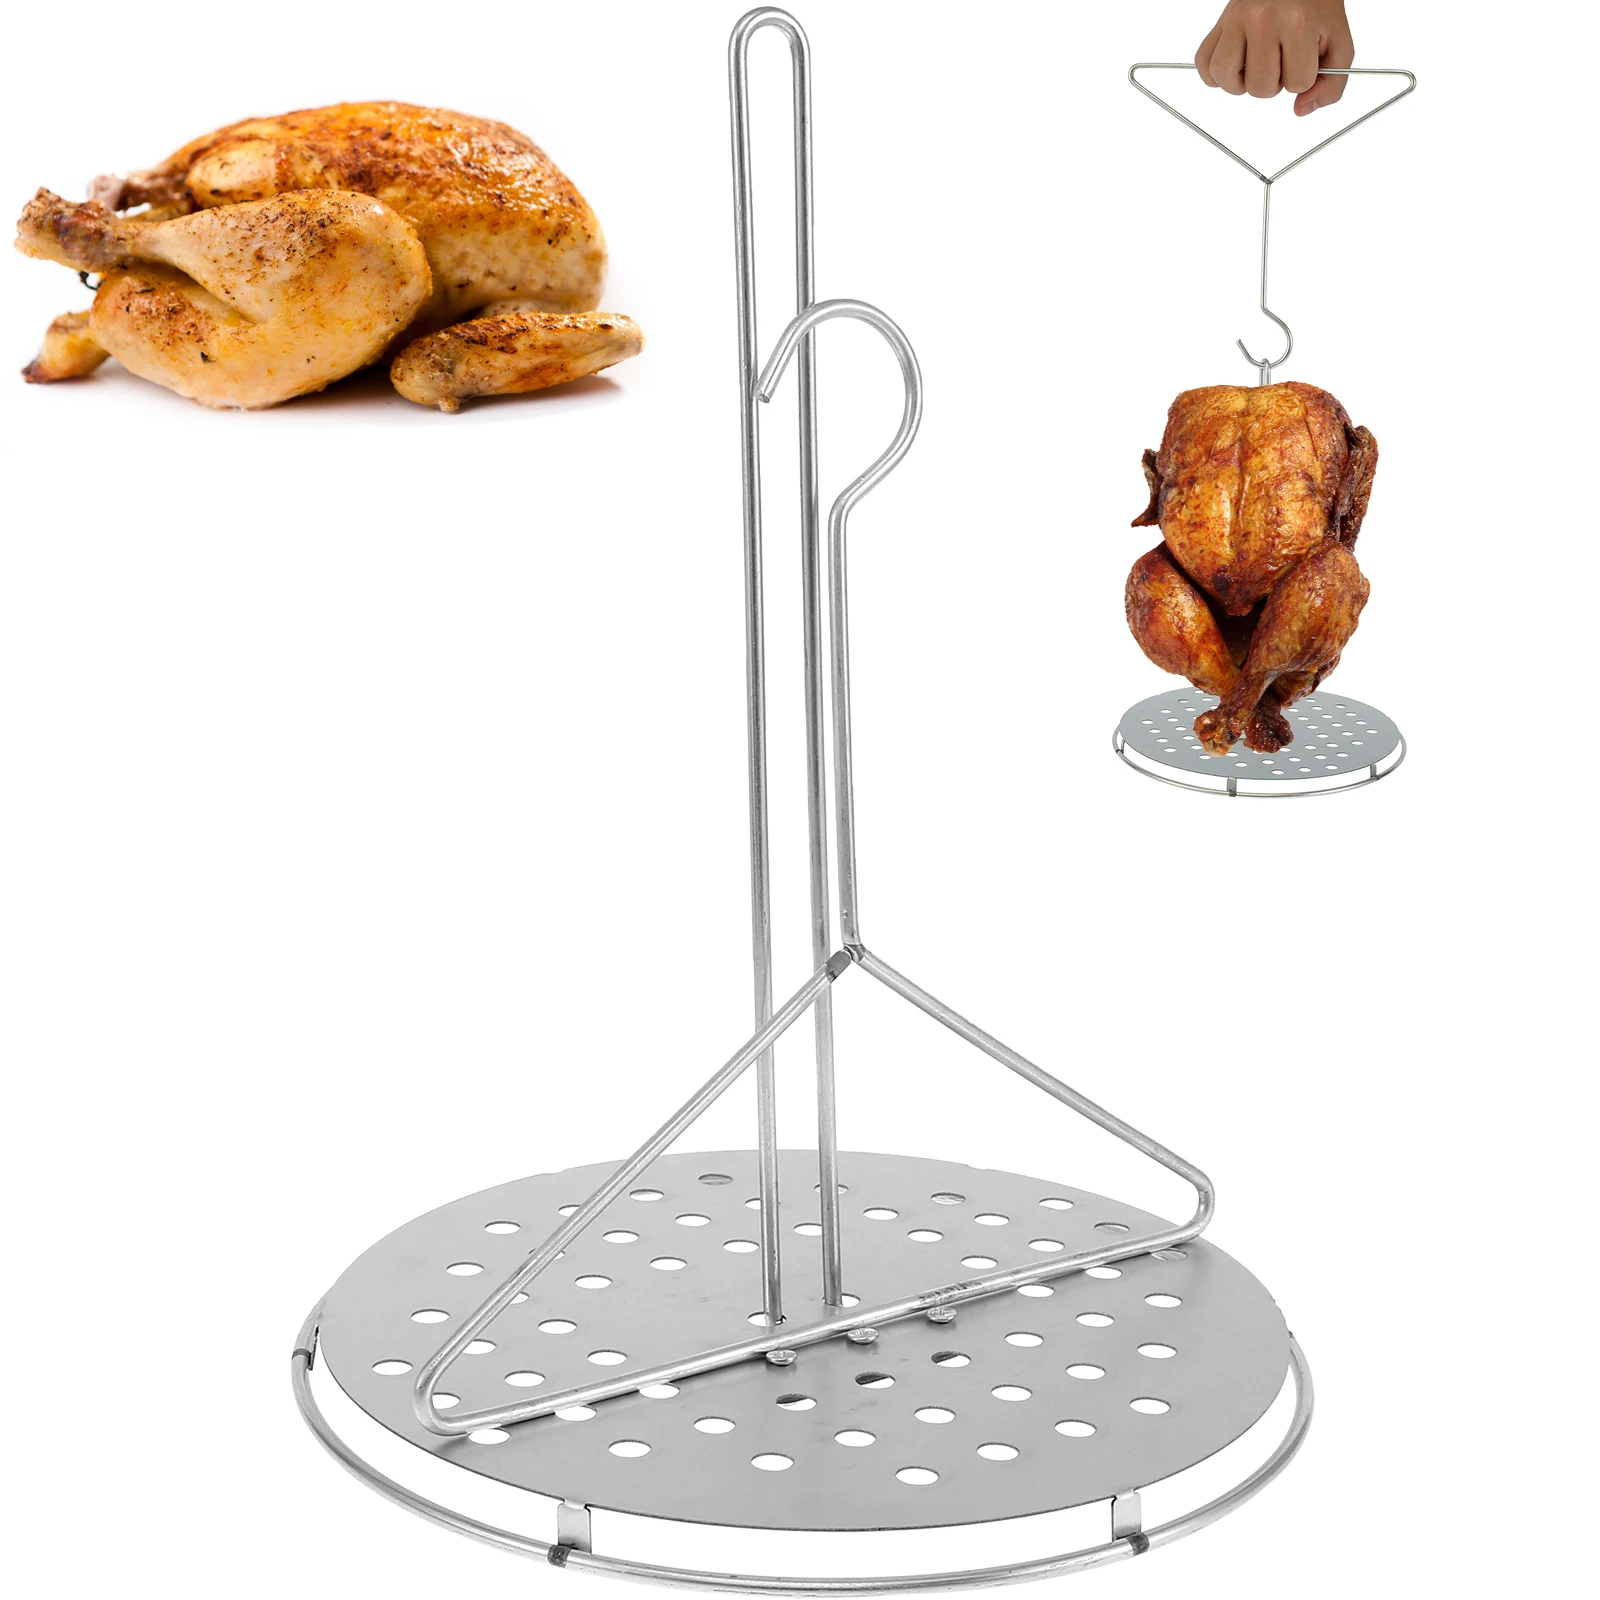 

Turkey Holder Heavy Duty Metal Chicken Holder Portable Detachable Poultry Hanger Multifunctional Vertical Grill Rack Barbecue